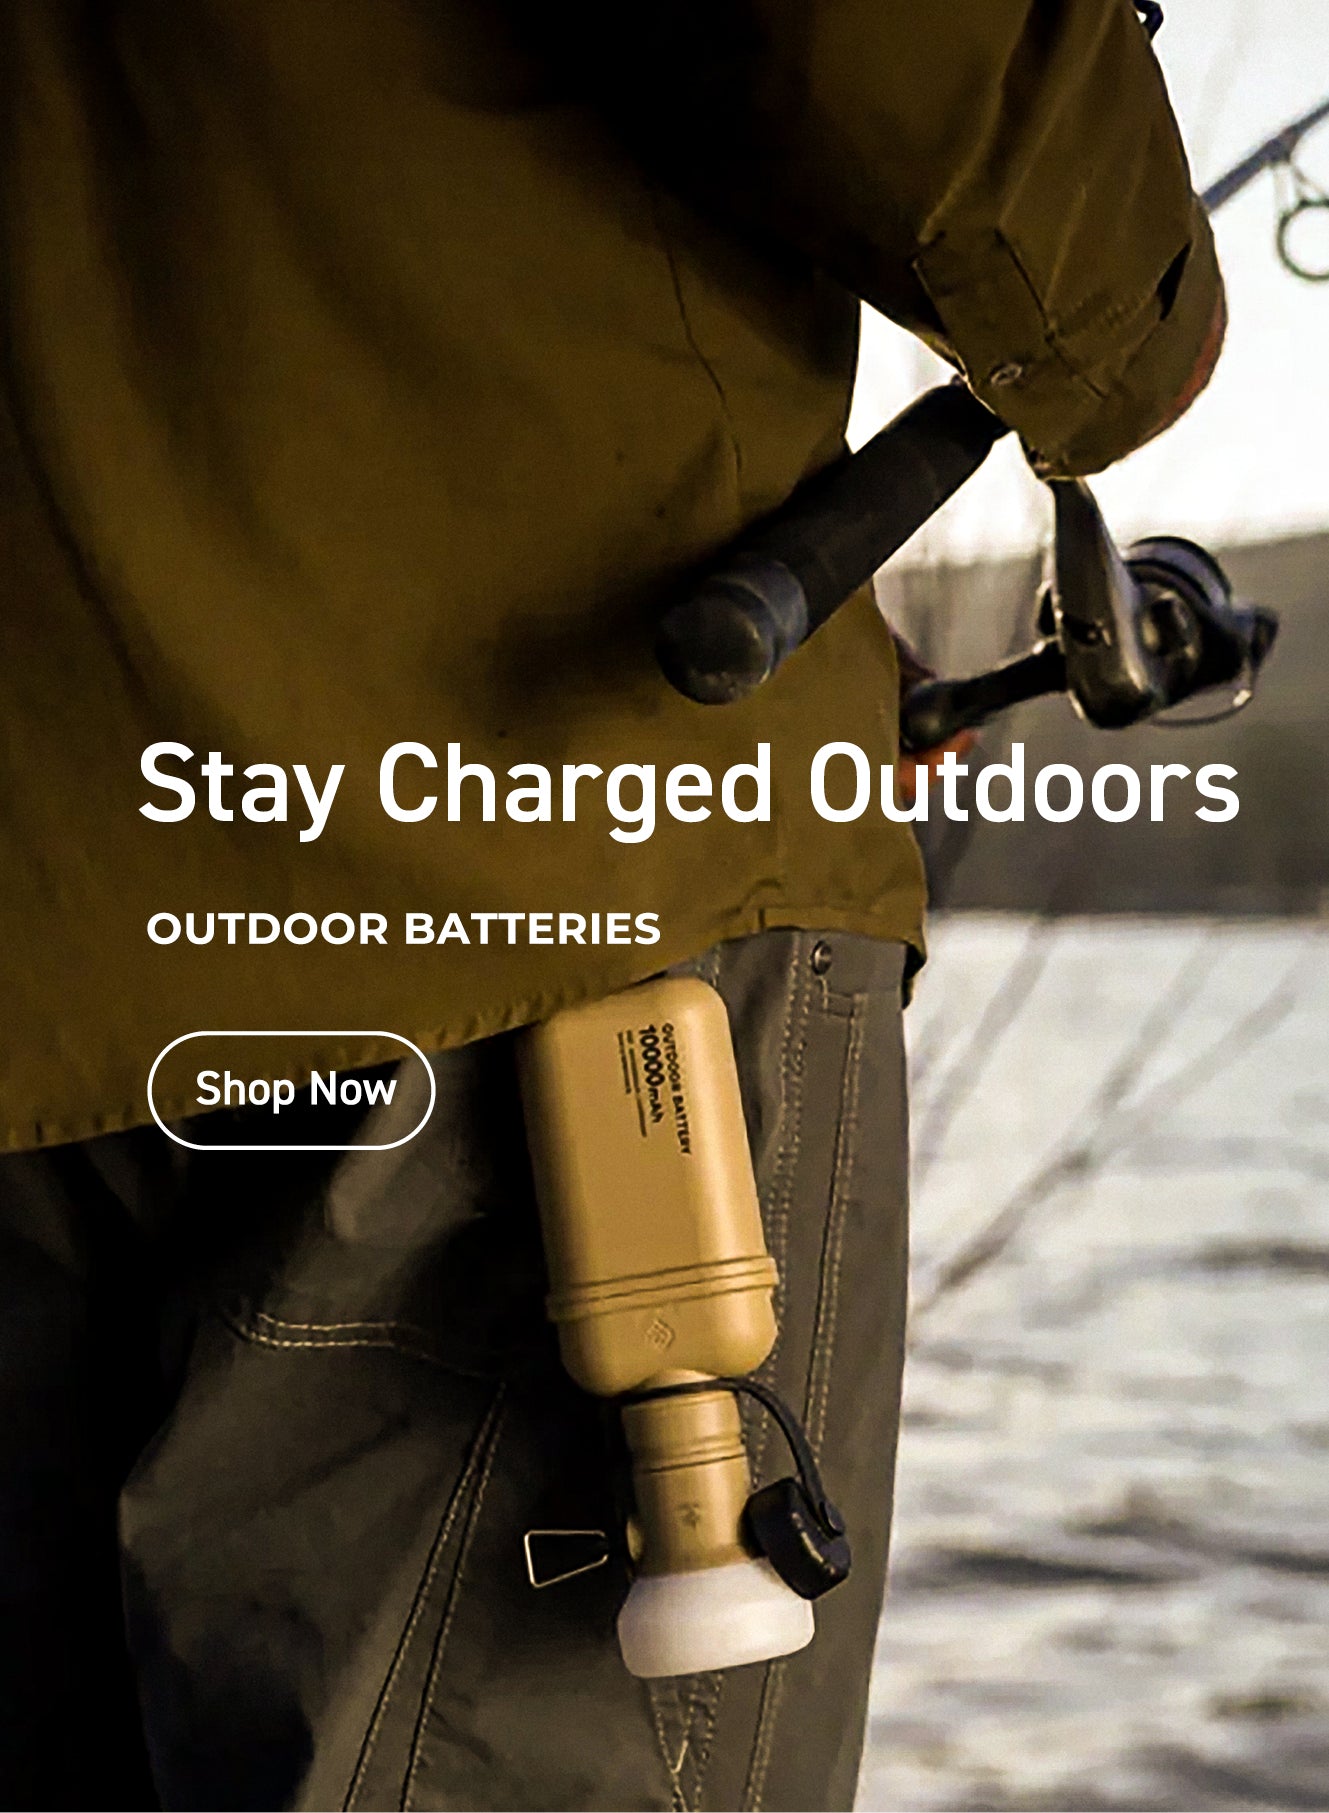 outdoor batteries - click to shop - stay charged outdoors with nestout